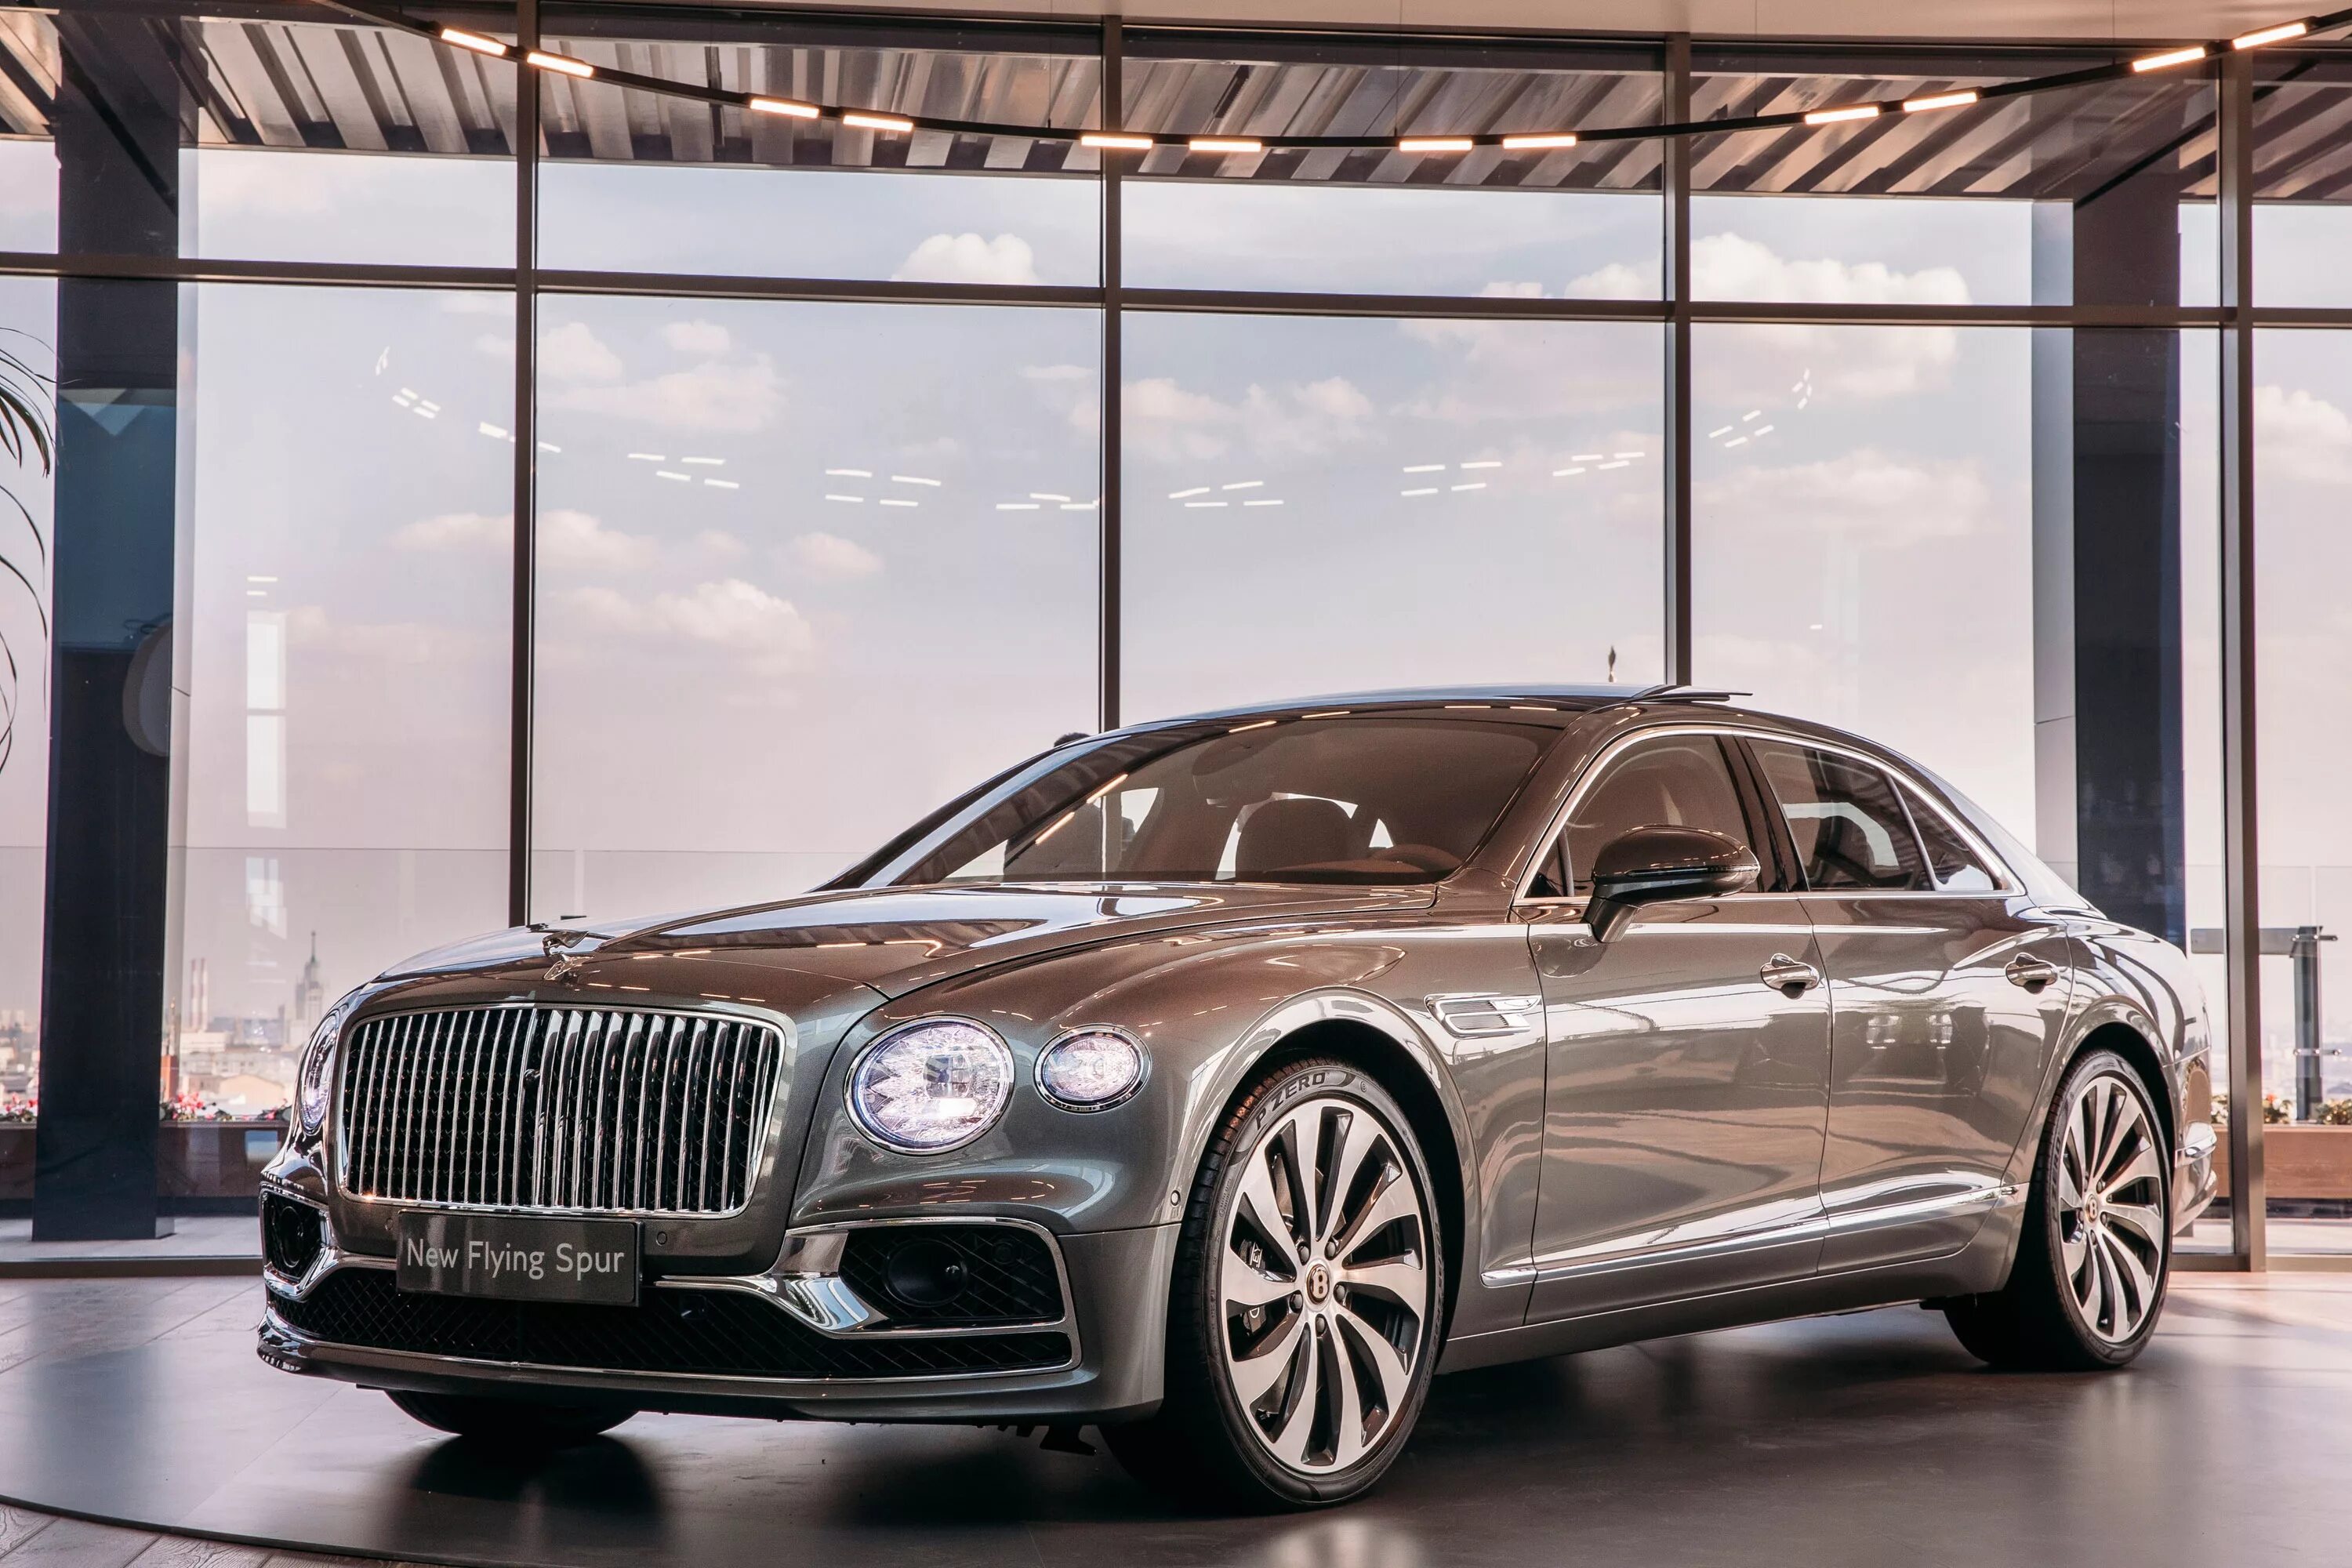 Бентли flying spur. Bentley Flying Spur 2020. Bentley Flying Spur 2021. Бентли 2020 Flying Spur w12. Бентли Flying Spur 2021.